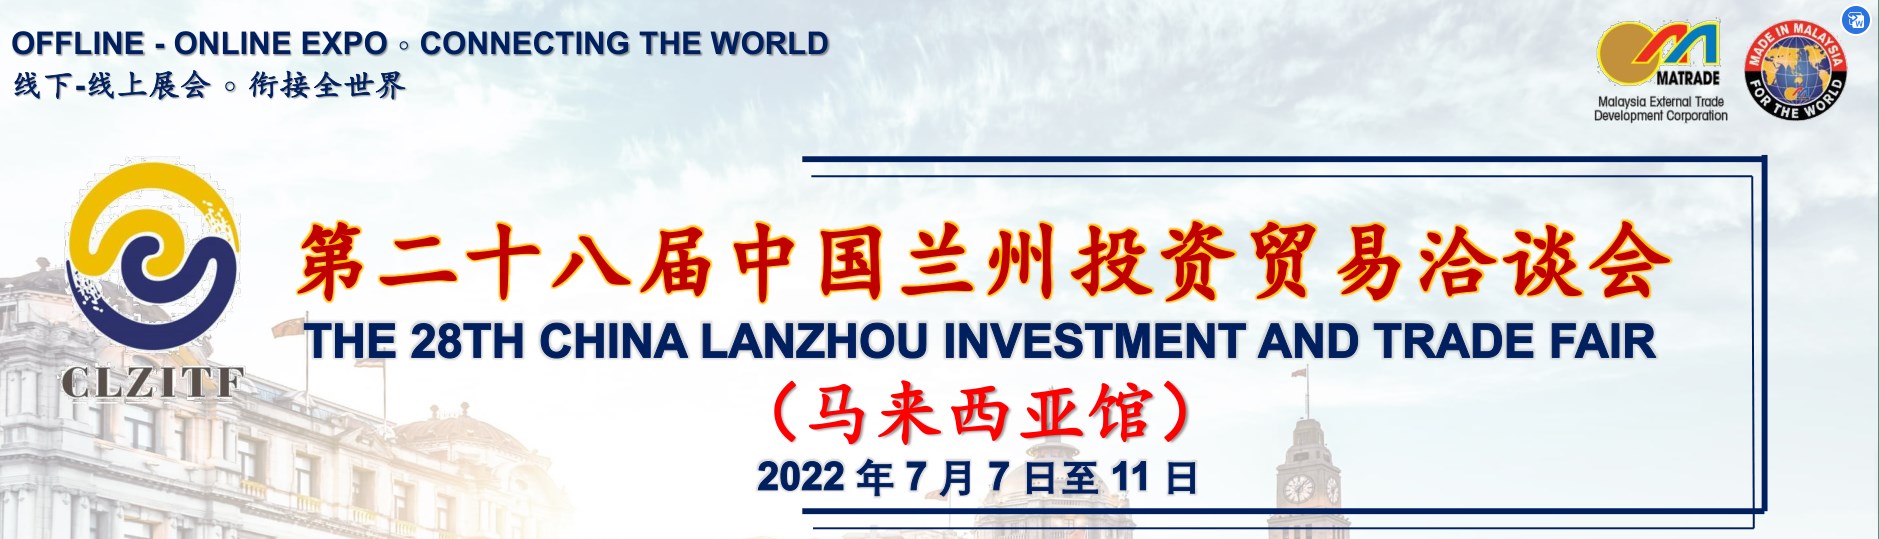 Le 28th China Lanzhou Investment and Trade Fair